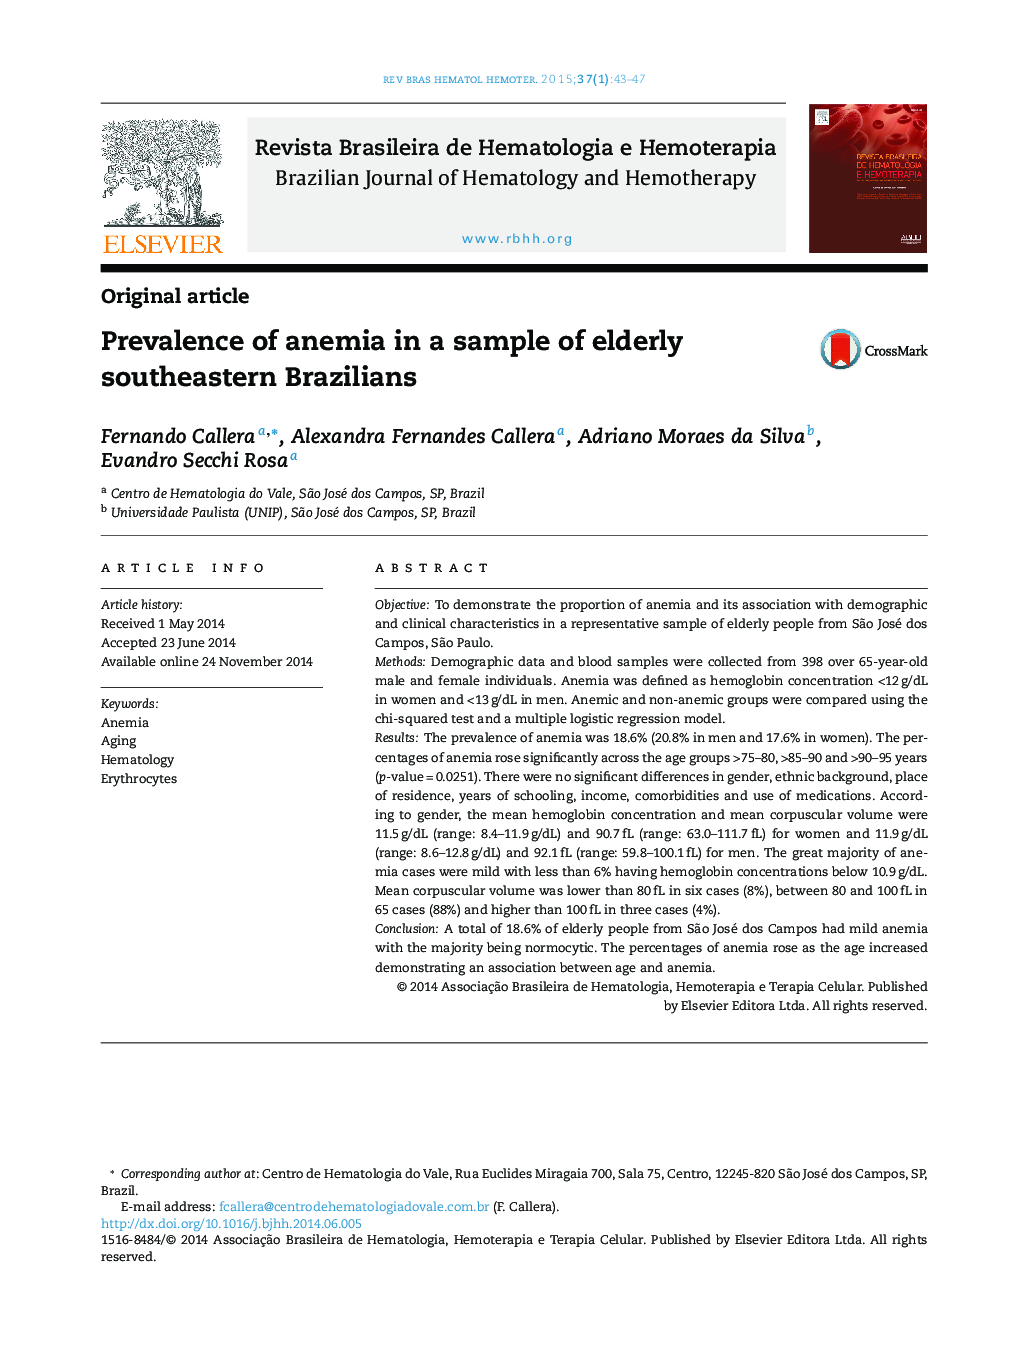 Prevalence of anemia in a sample of elderly southeastern Brazilians